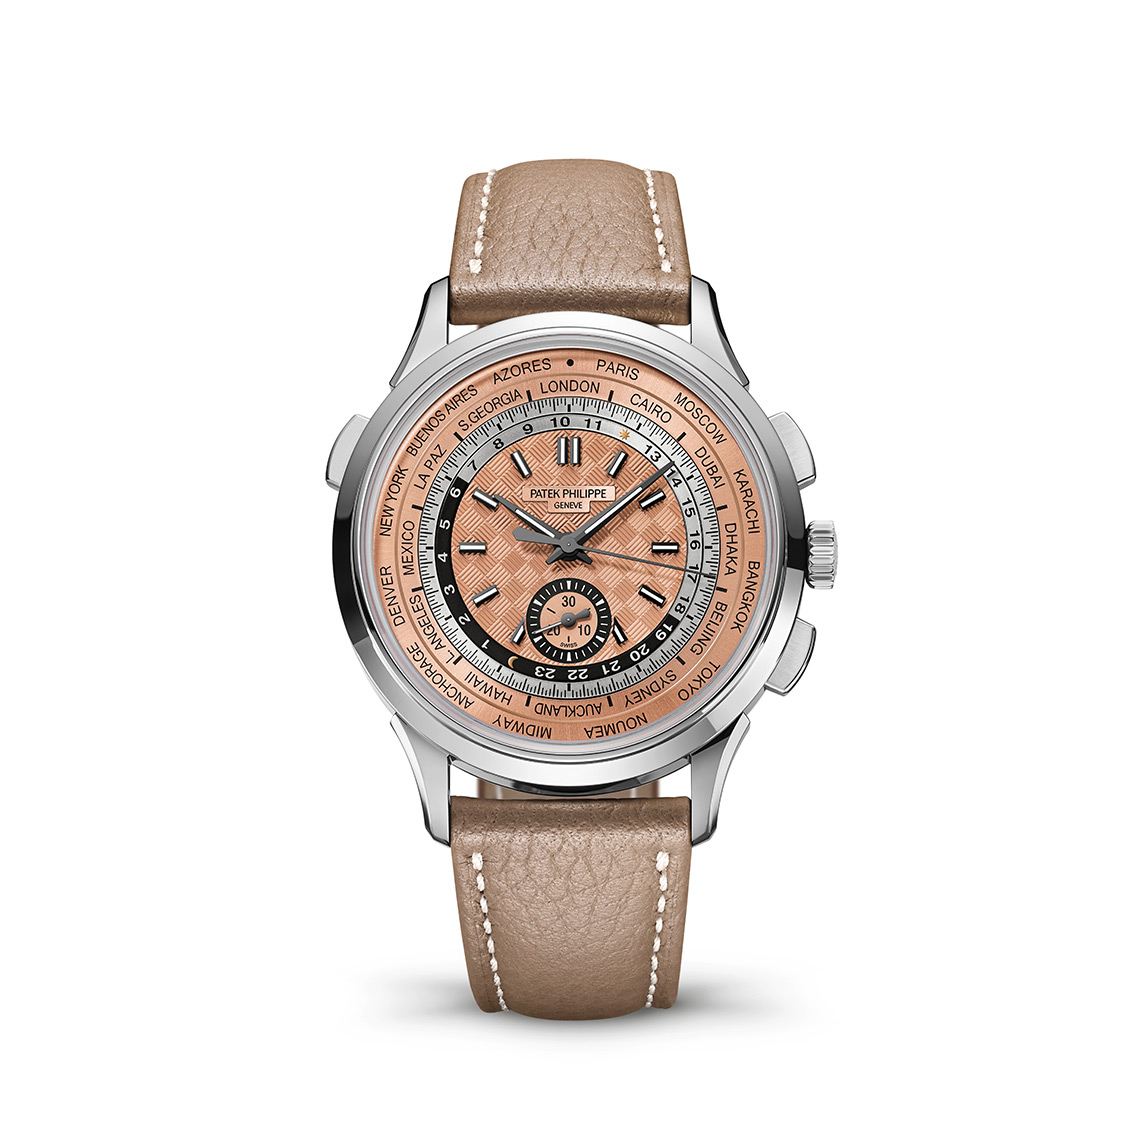 COMPLICATIONS SELF-WINDING WORLD TIME FLYBACK CHRONOGRAPH